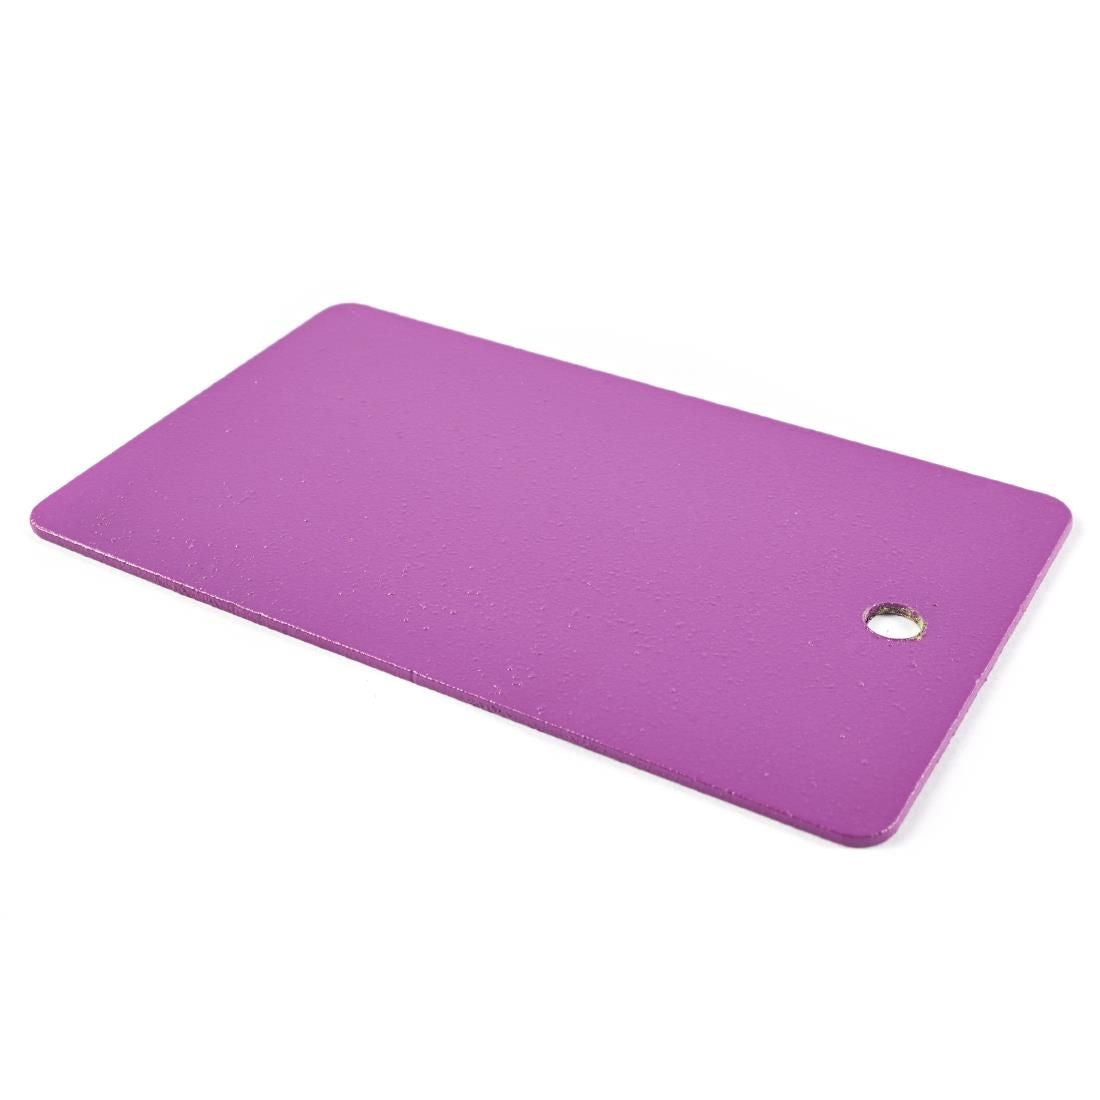 AF332 Swatch for Bolero Purple Pavement Furniture JD Catering Equipment Solutions Ltd